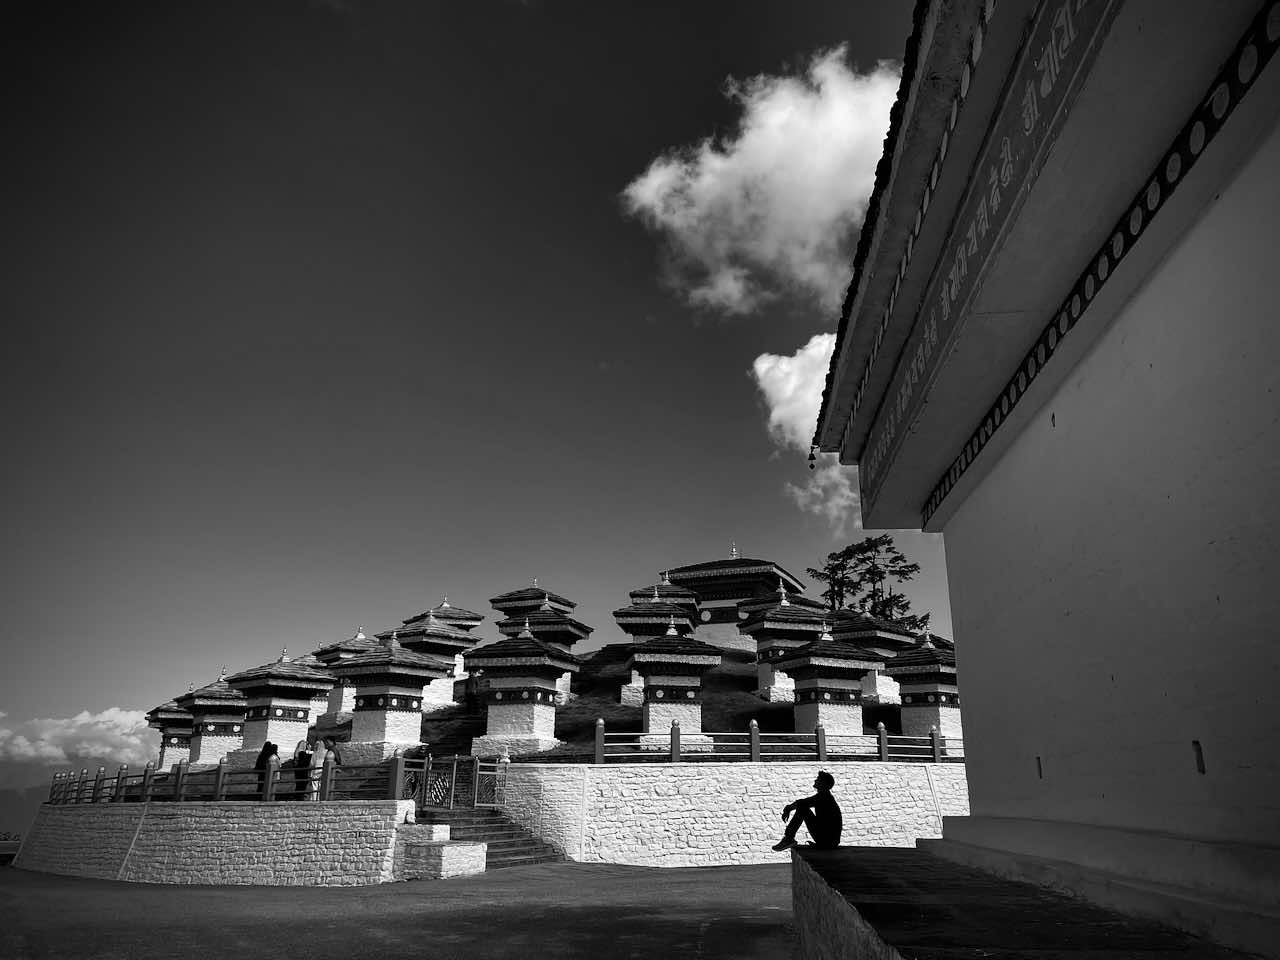 A beautiful black and while image of the stupas atop Bhutans Dochu La pass with the sillhouette of a sitting man in the forground